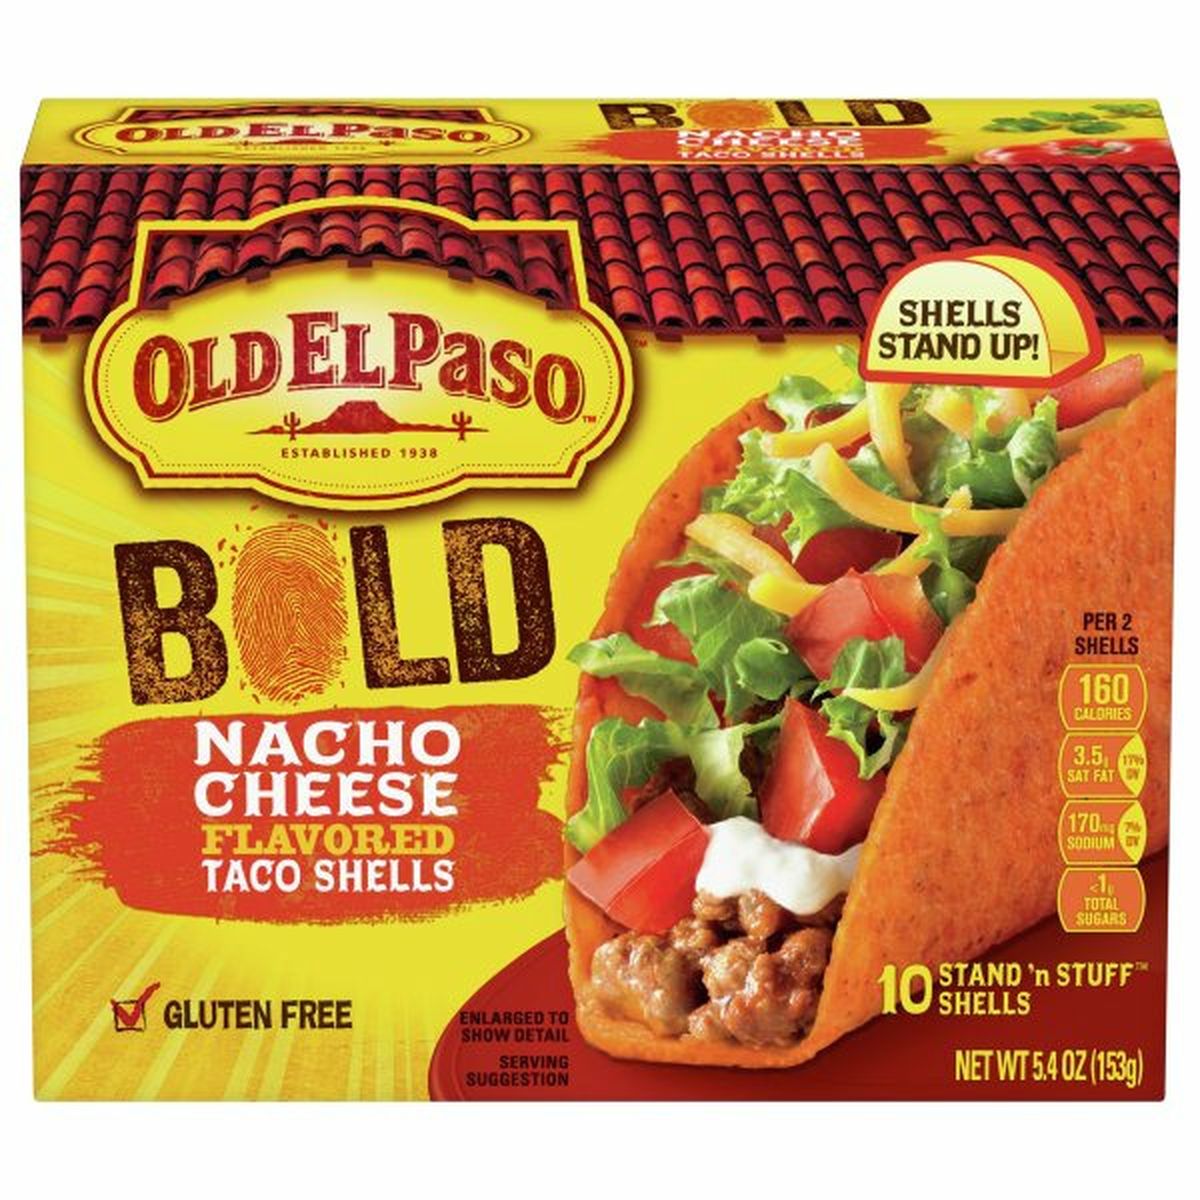 Calories in Old El Paso Taco Shells, Nacho Cheese Flavored, Bold, Stand 'n Stuff